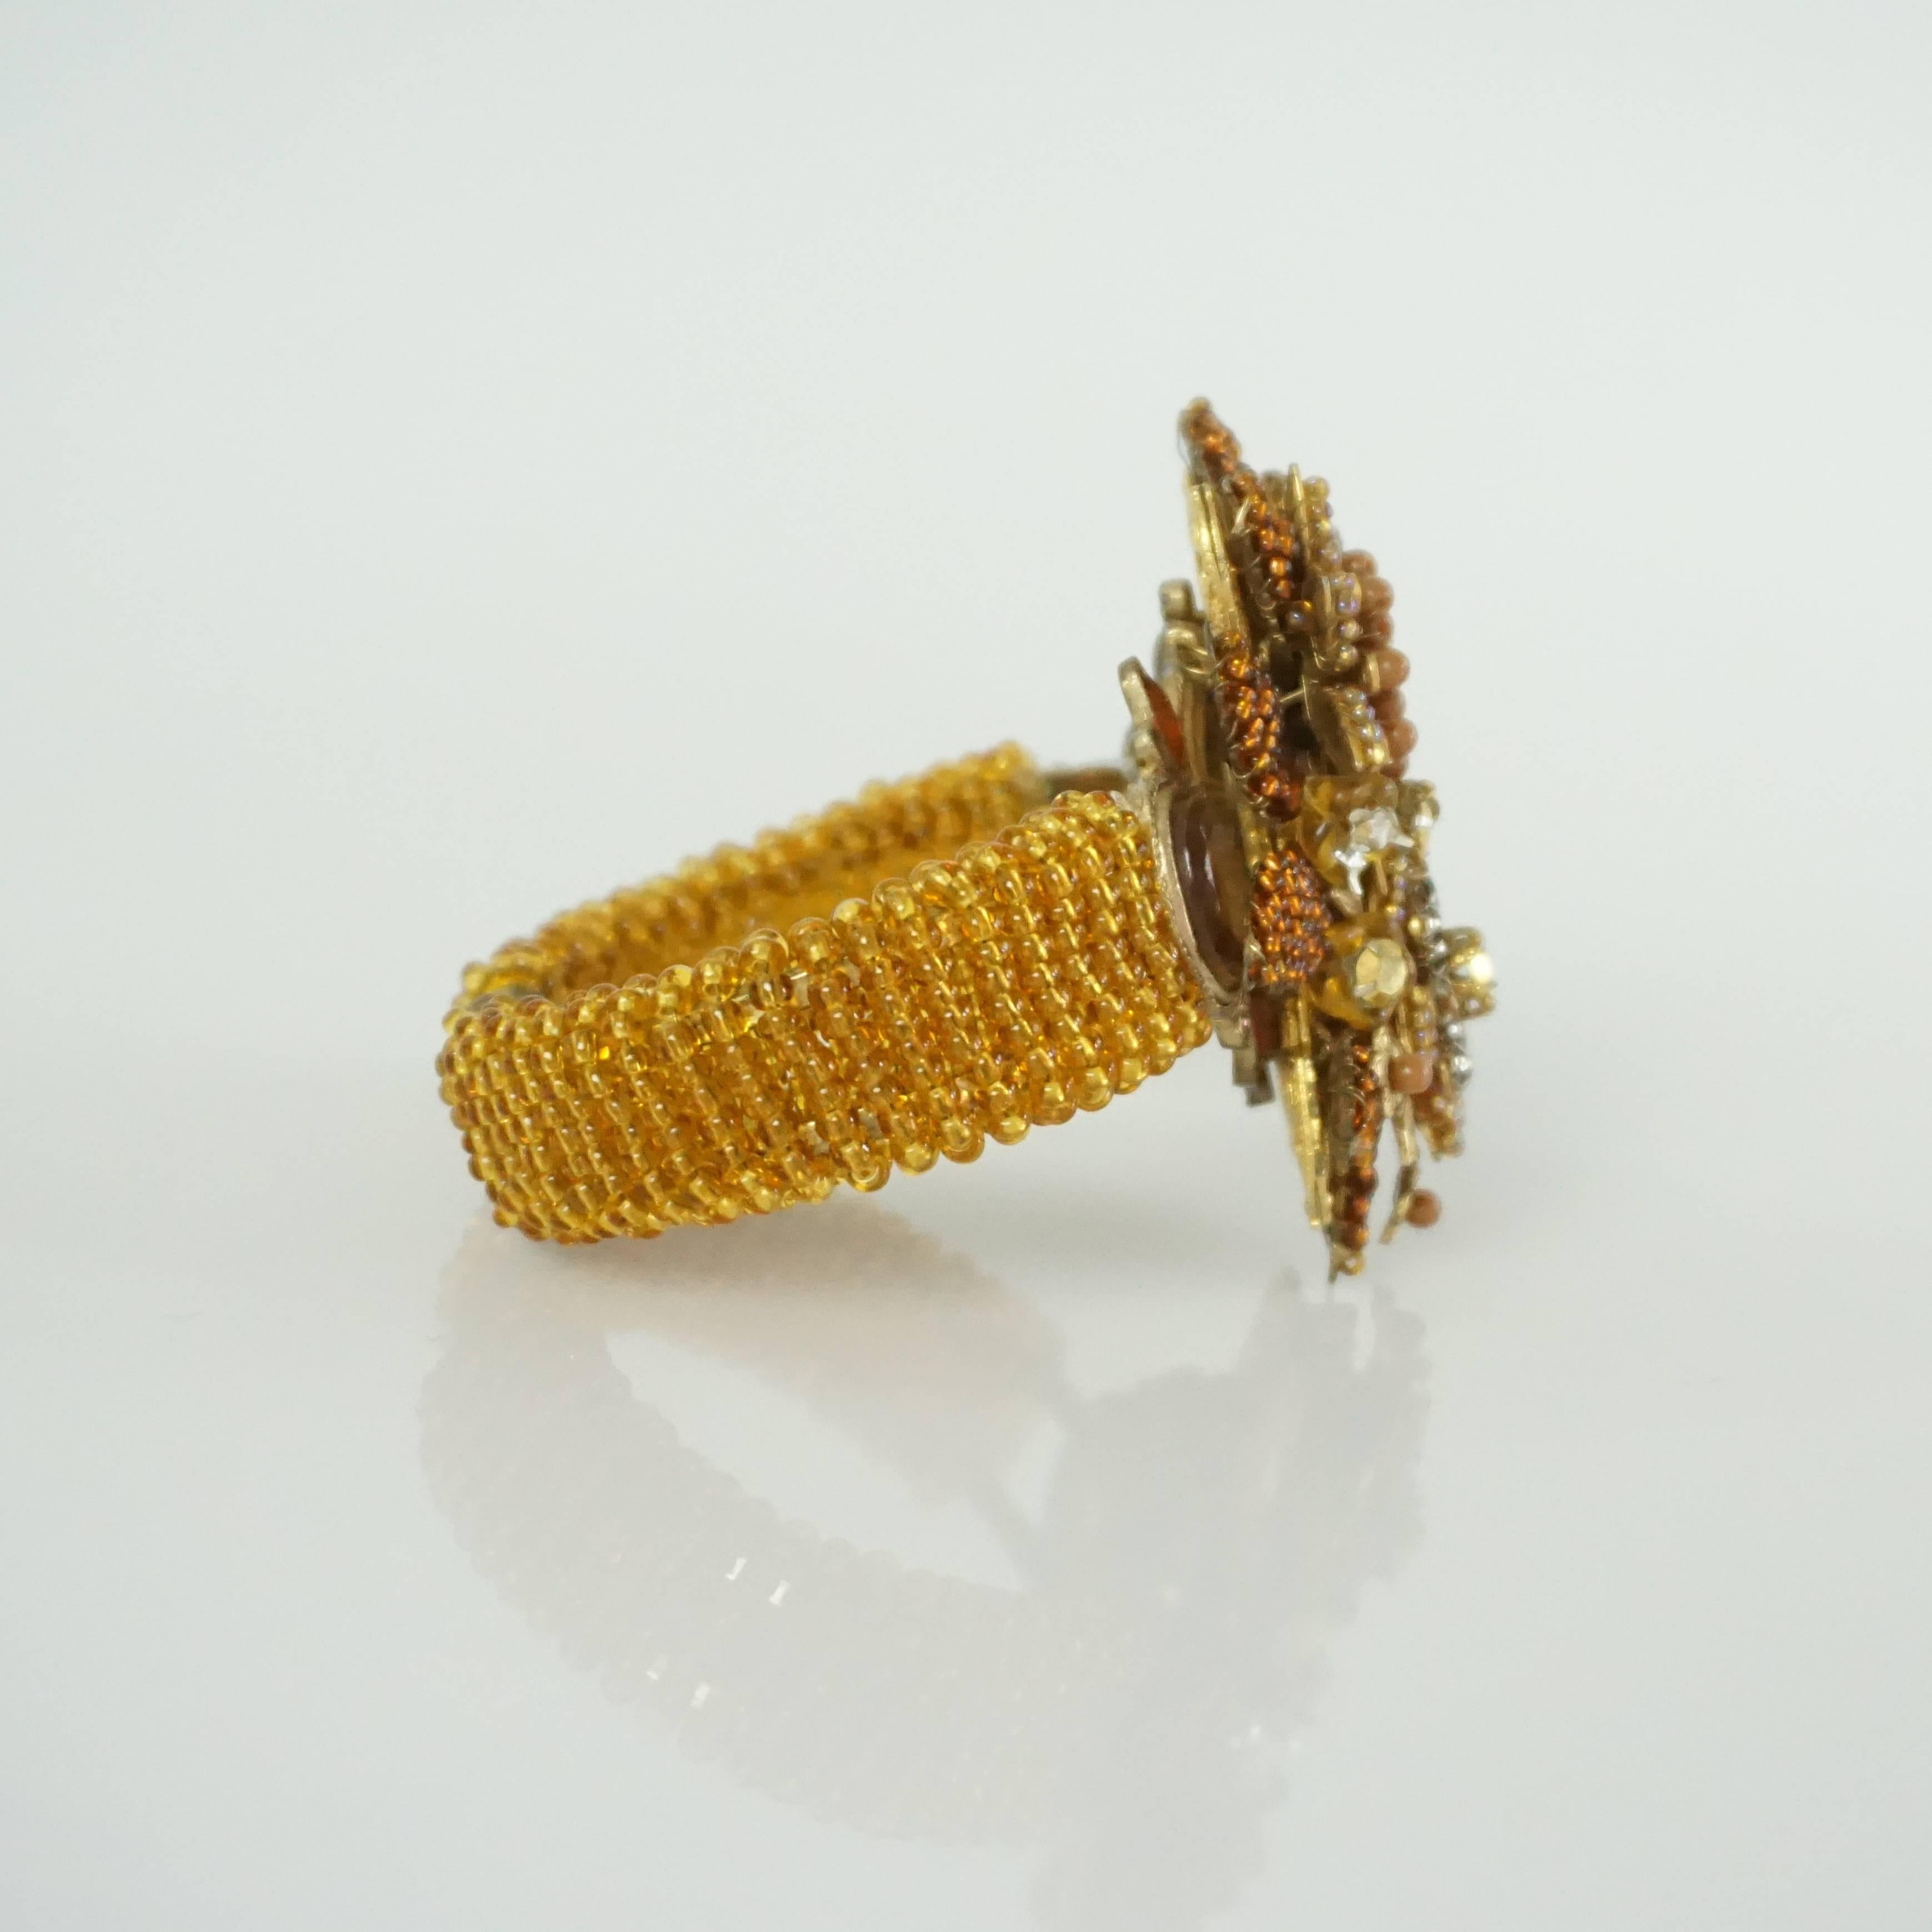 This Stanley Hagler bracelet has beads in an amber color creating a floral design. The band is covered in beads also. This bracelet is in excellent condition with discoloration on the inner metal. 

Measurements
Width of band: 0.75